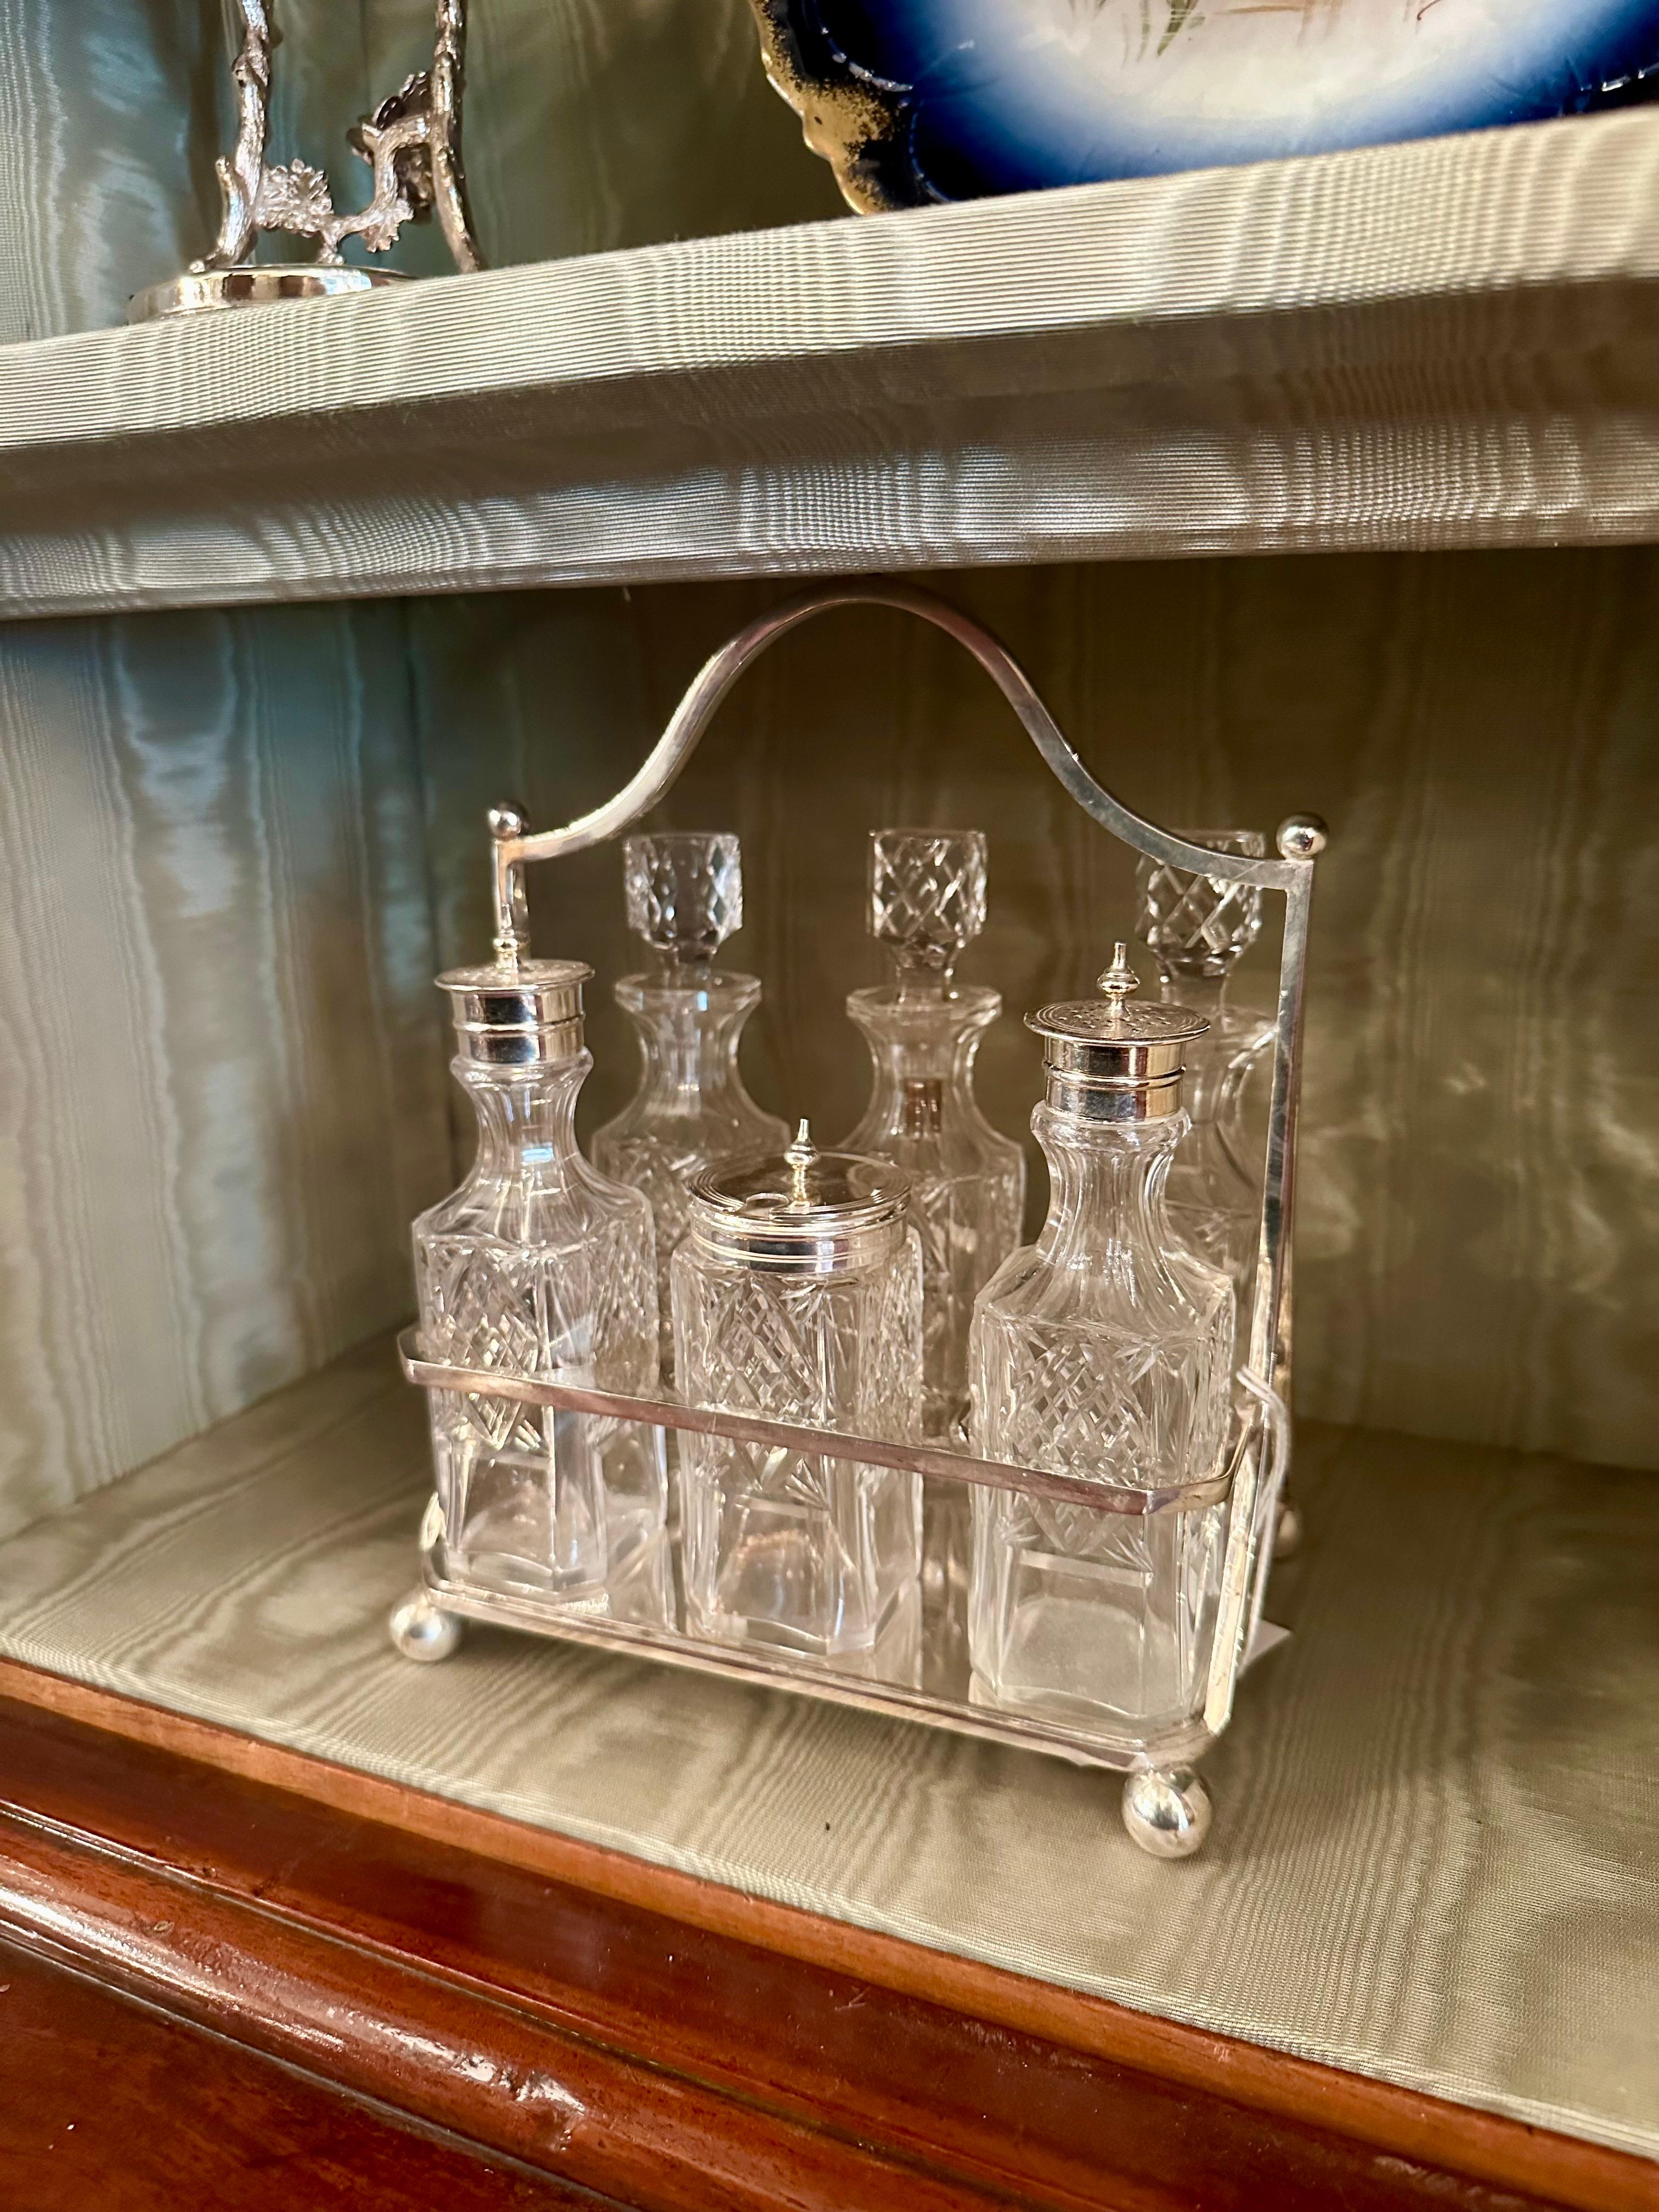 Antique English Silver Plate and Cut Crystal Cruet Set, Circa 1880-1890. For Sale 3